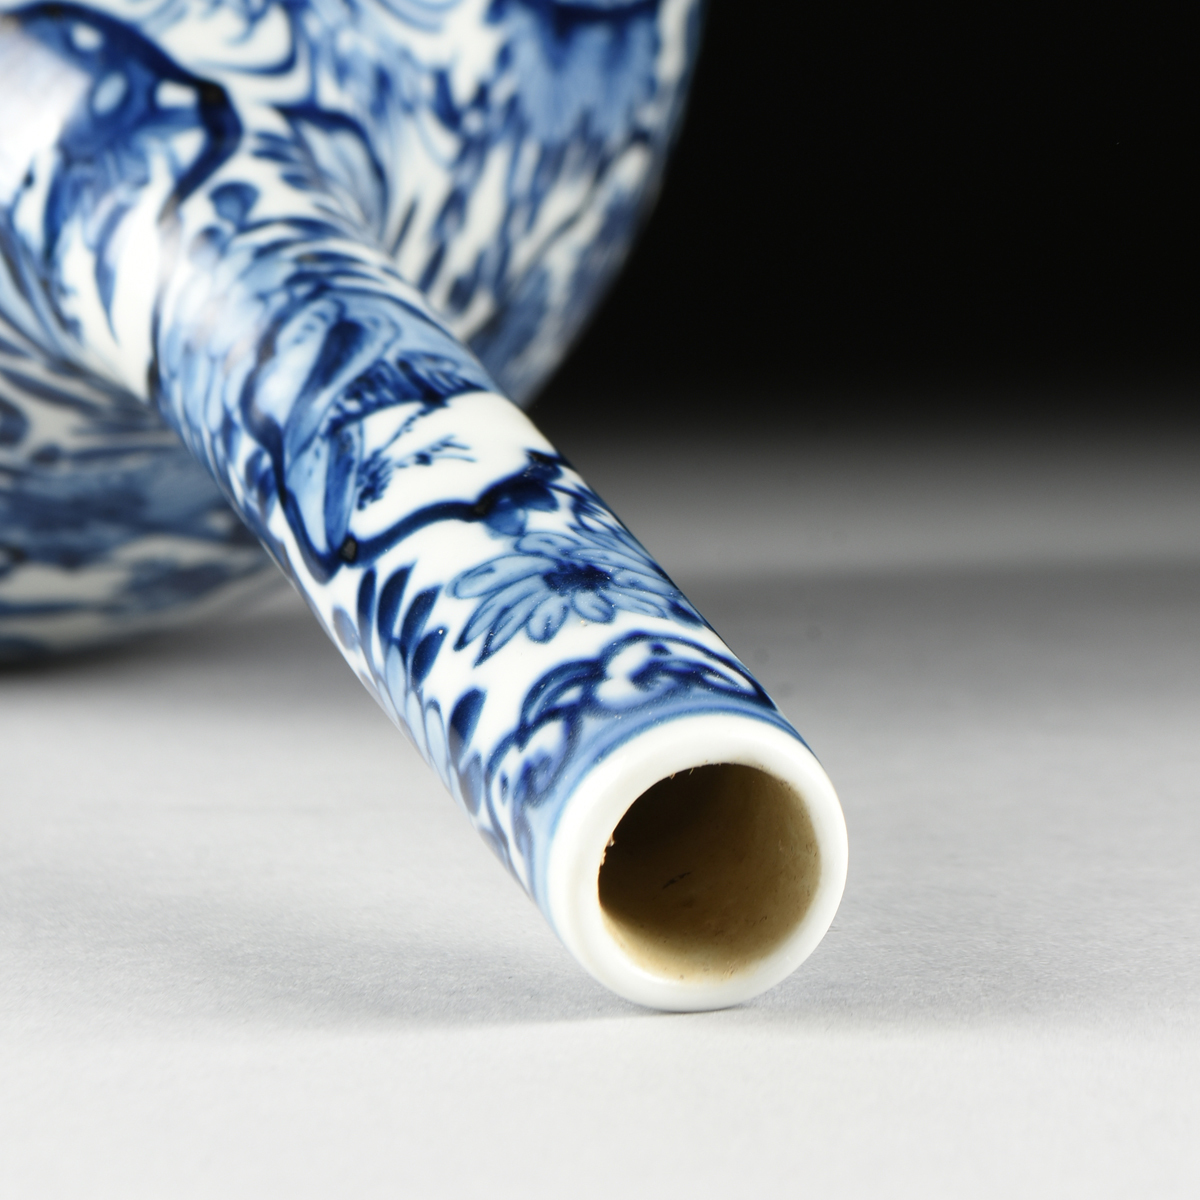 A QING DYNASTY BLUE AND WHITE PORCELAIN BOTTLE VASE, SHIPWRECK ARTIFACT, ATTRIBUTED TO THE KANGXI - Image 7 of 8